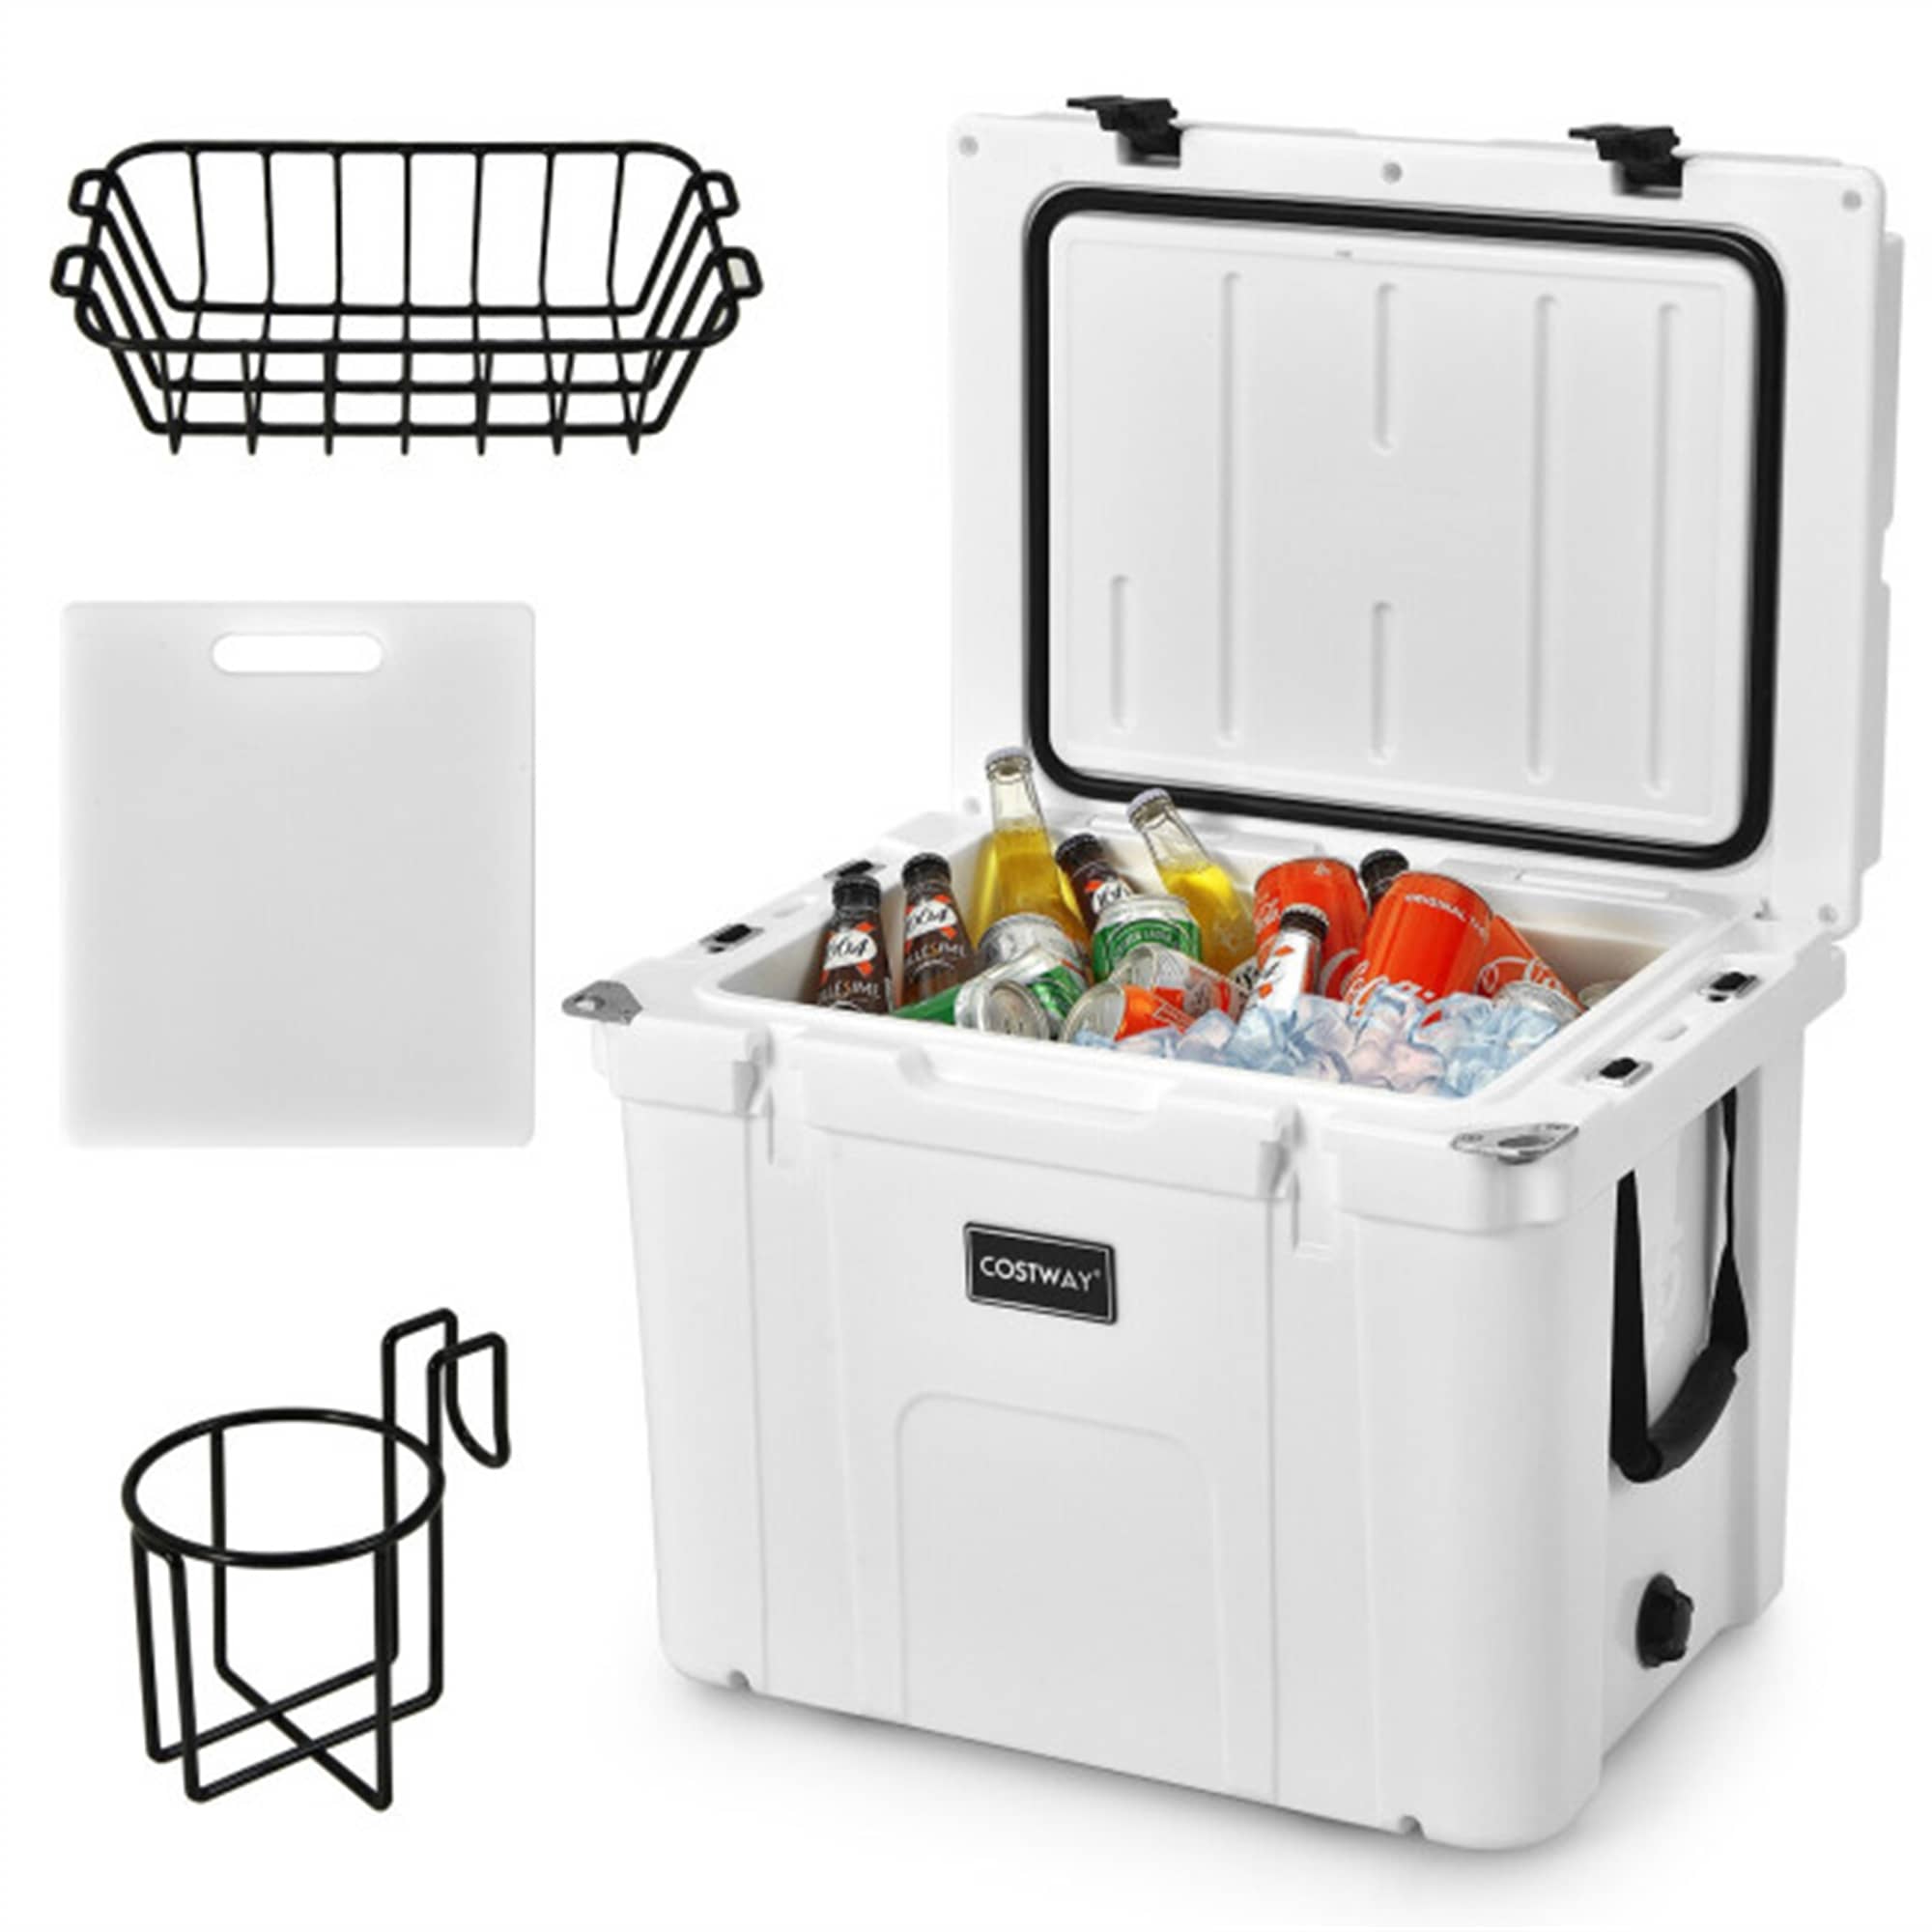 CASAINC 55 Quart Cooler Portable Ice Chest with Cutting Board Basket for Camping